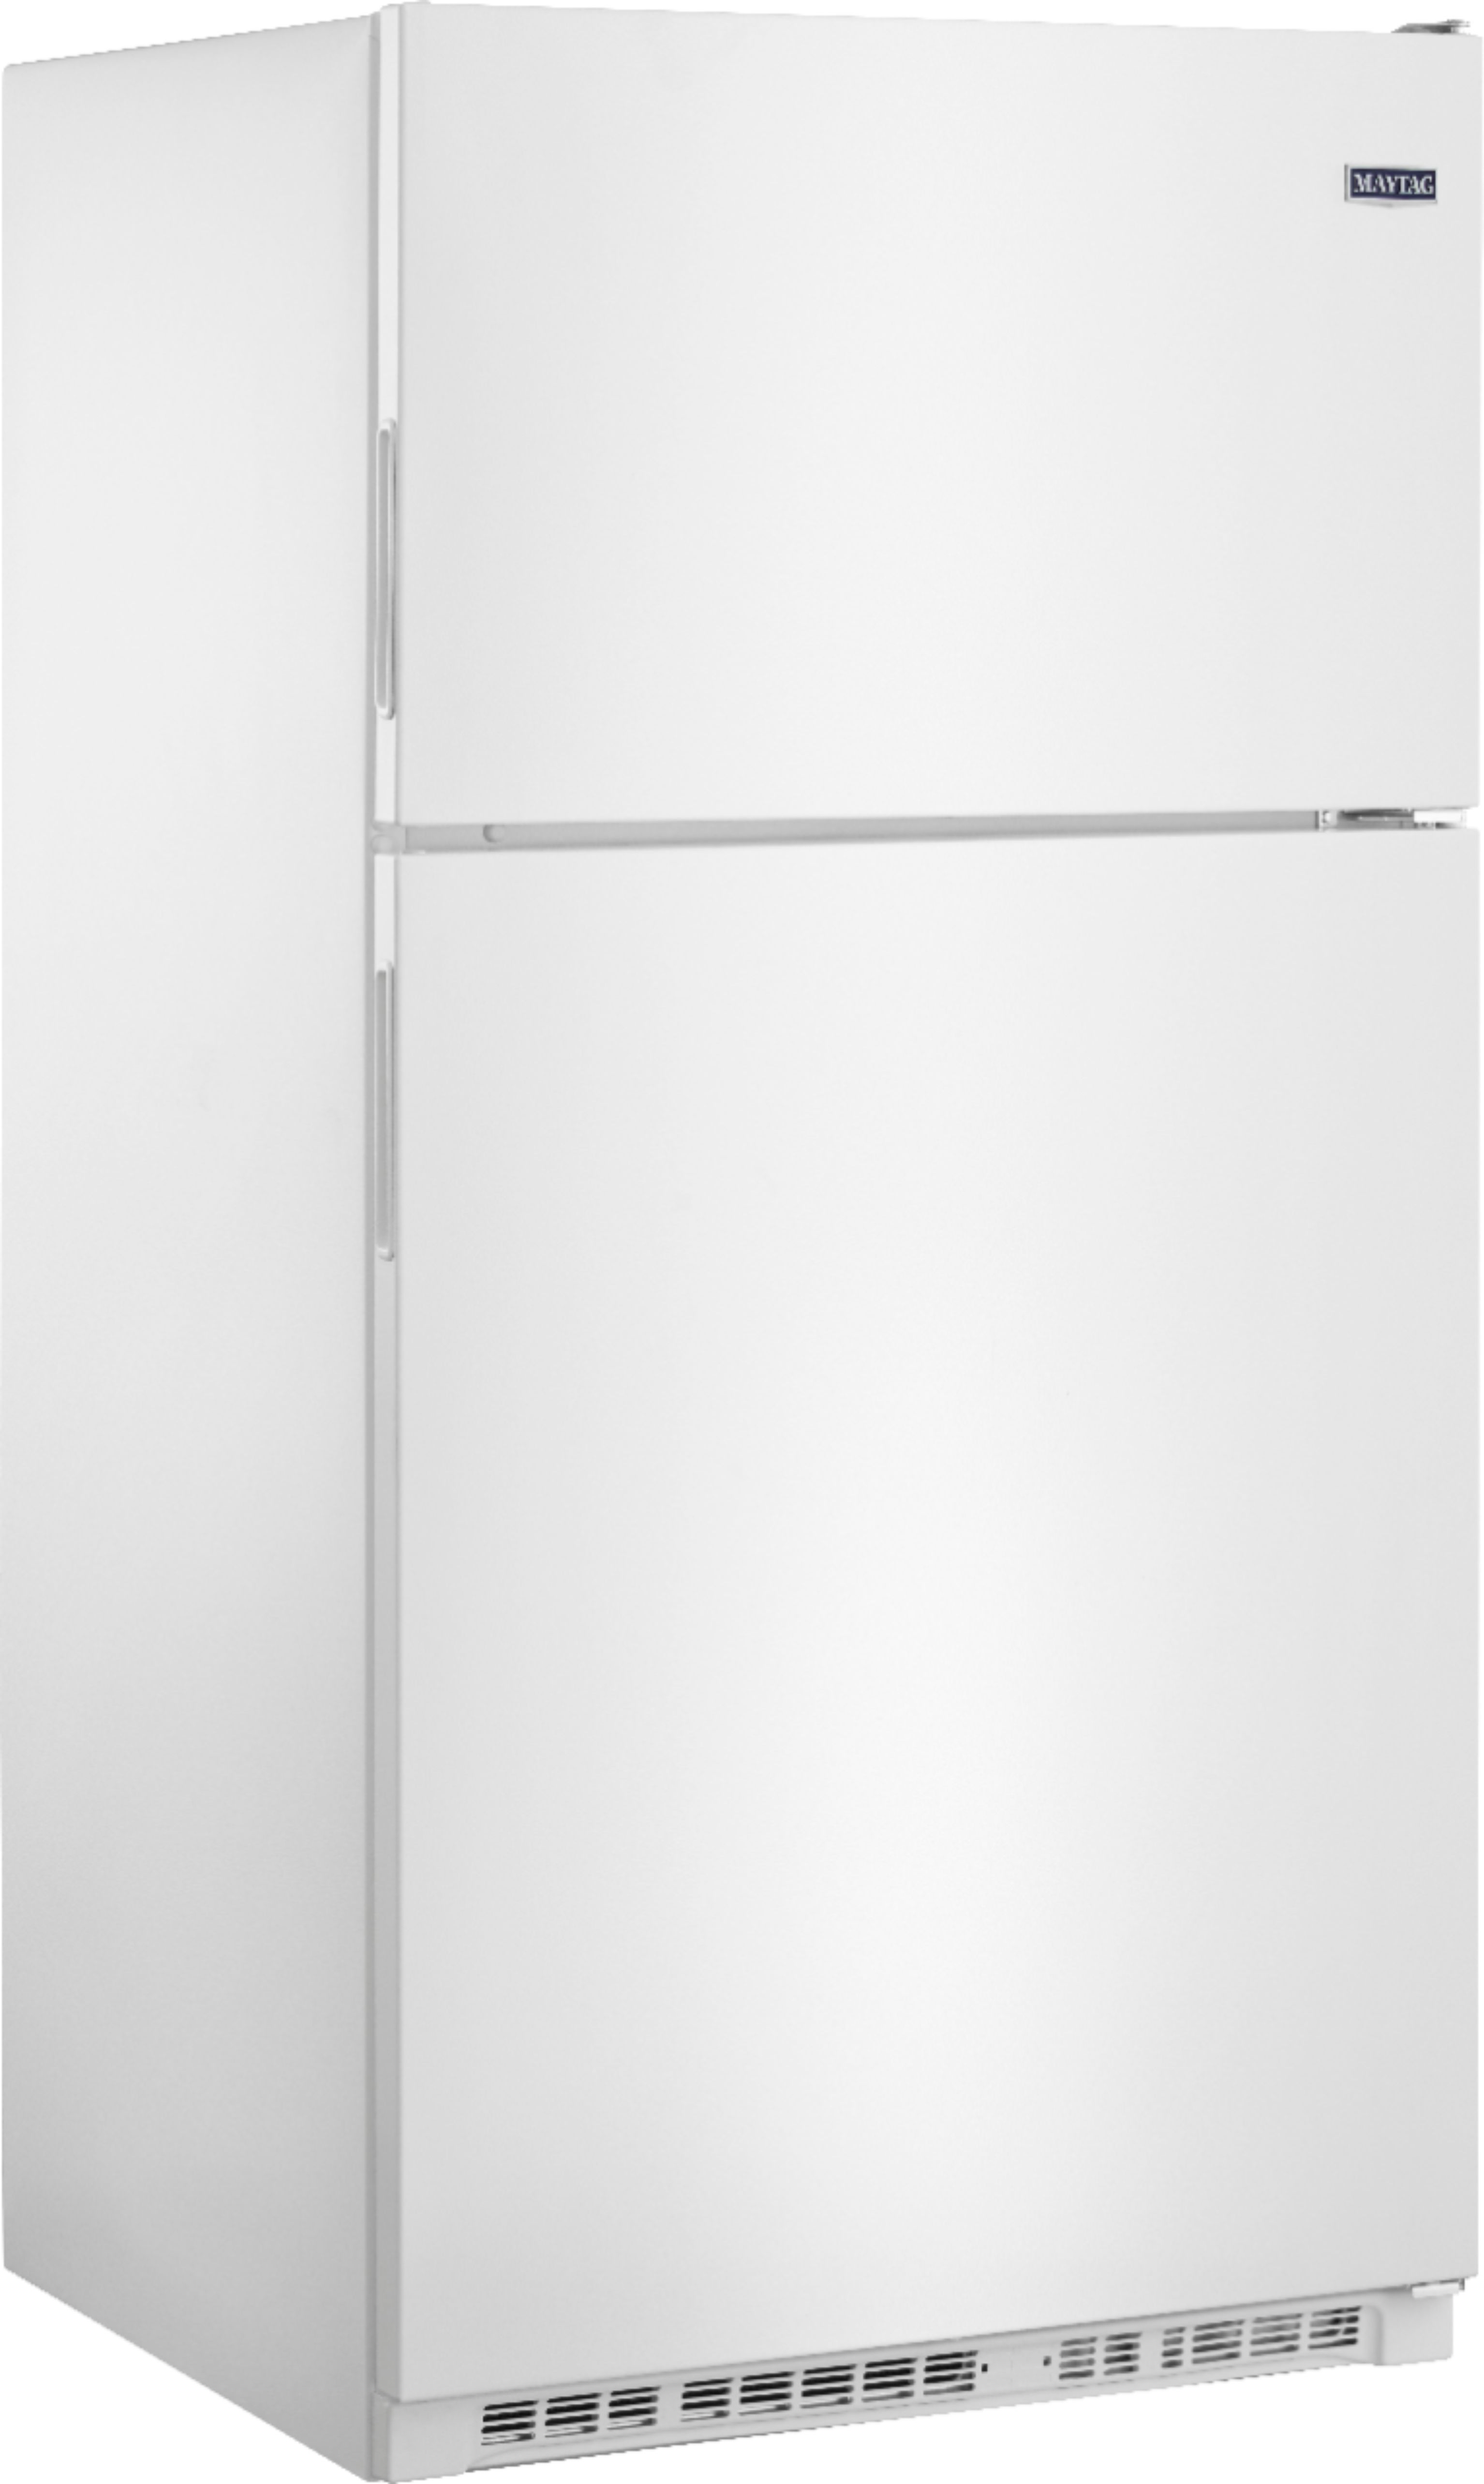 Angle View: Maytag - 20.5 Cu. Ft. Top-Freezer Refrigerator - White